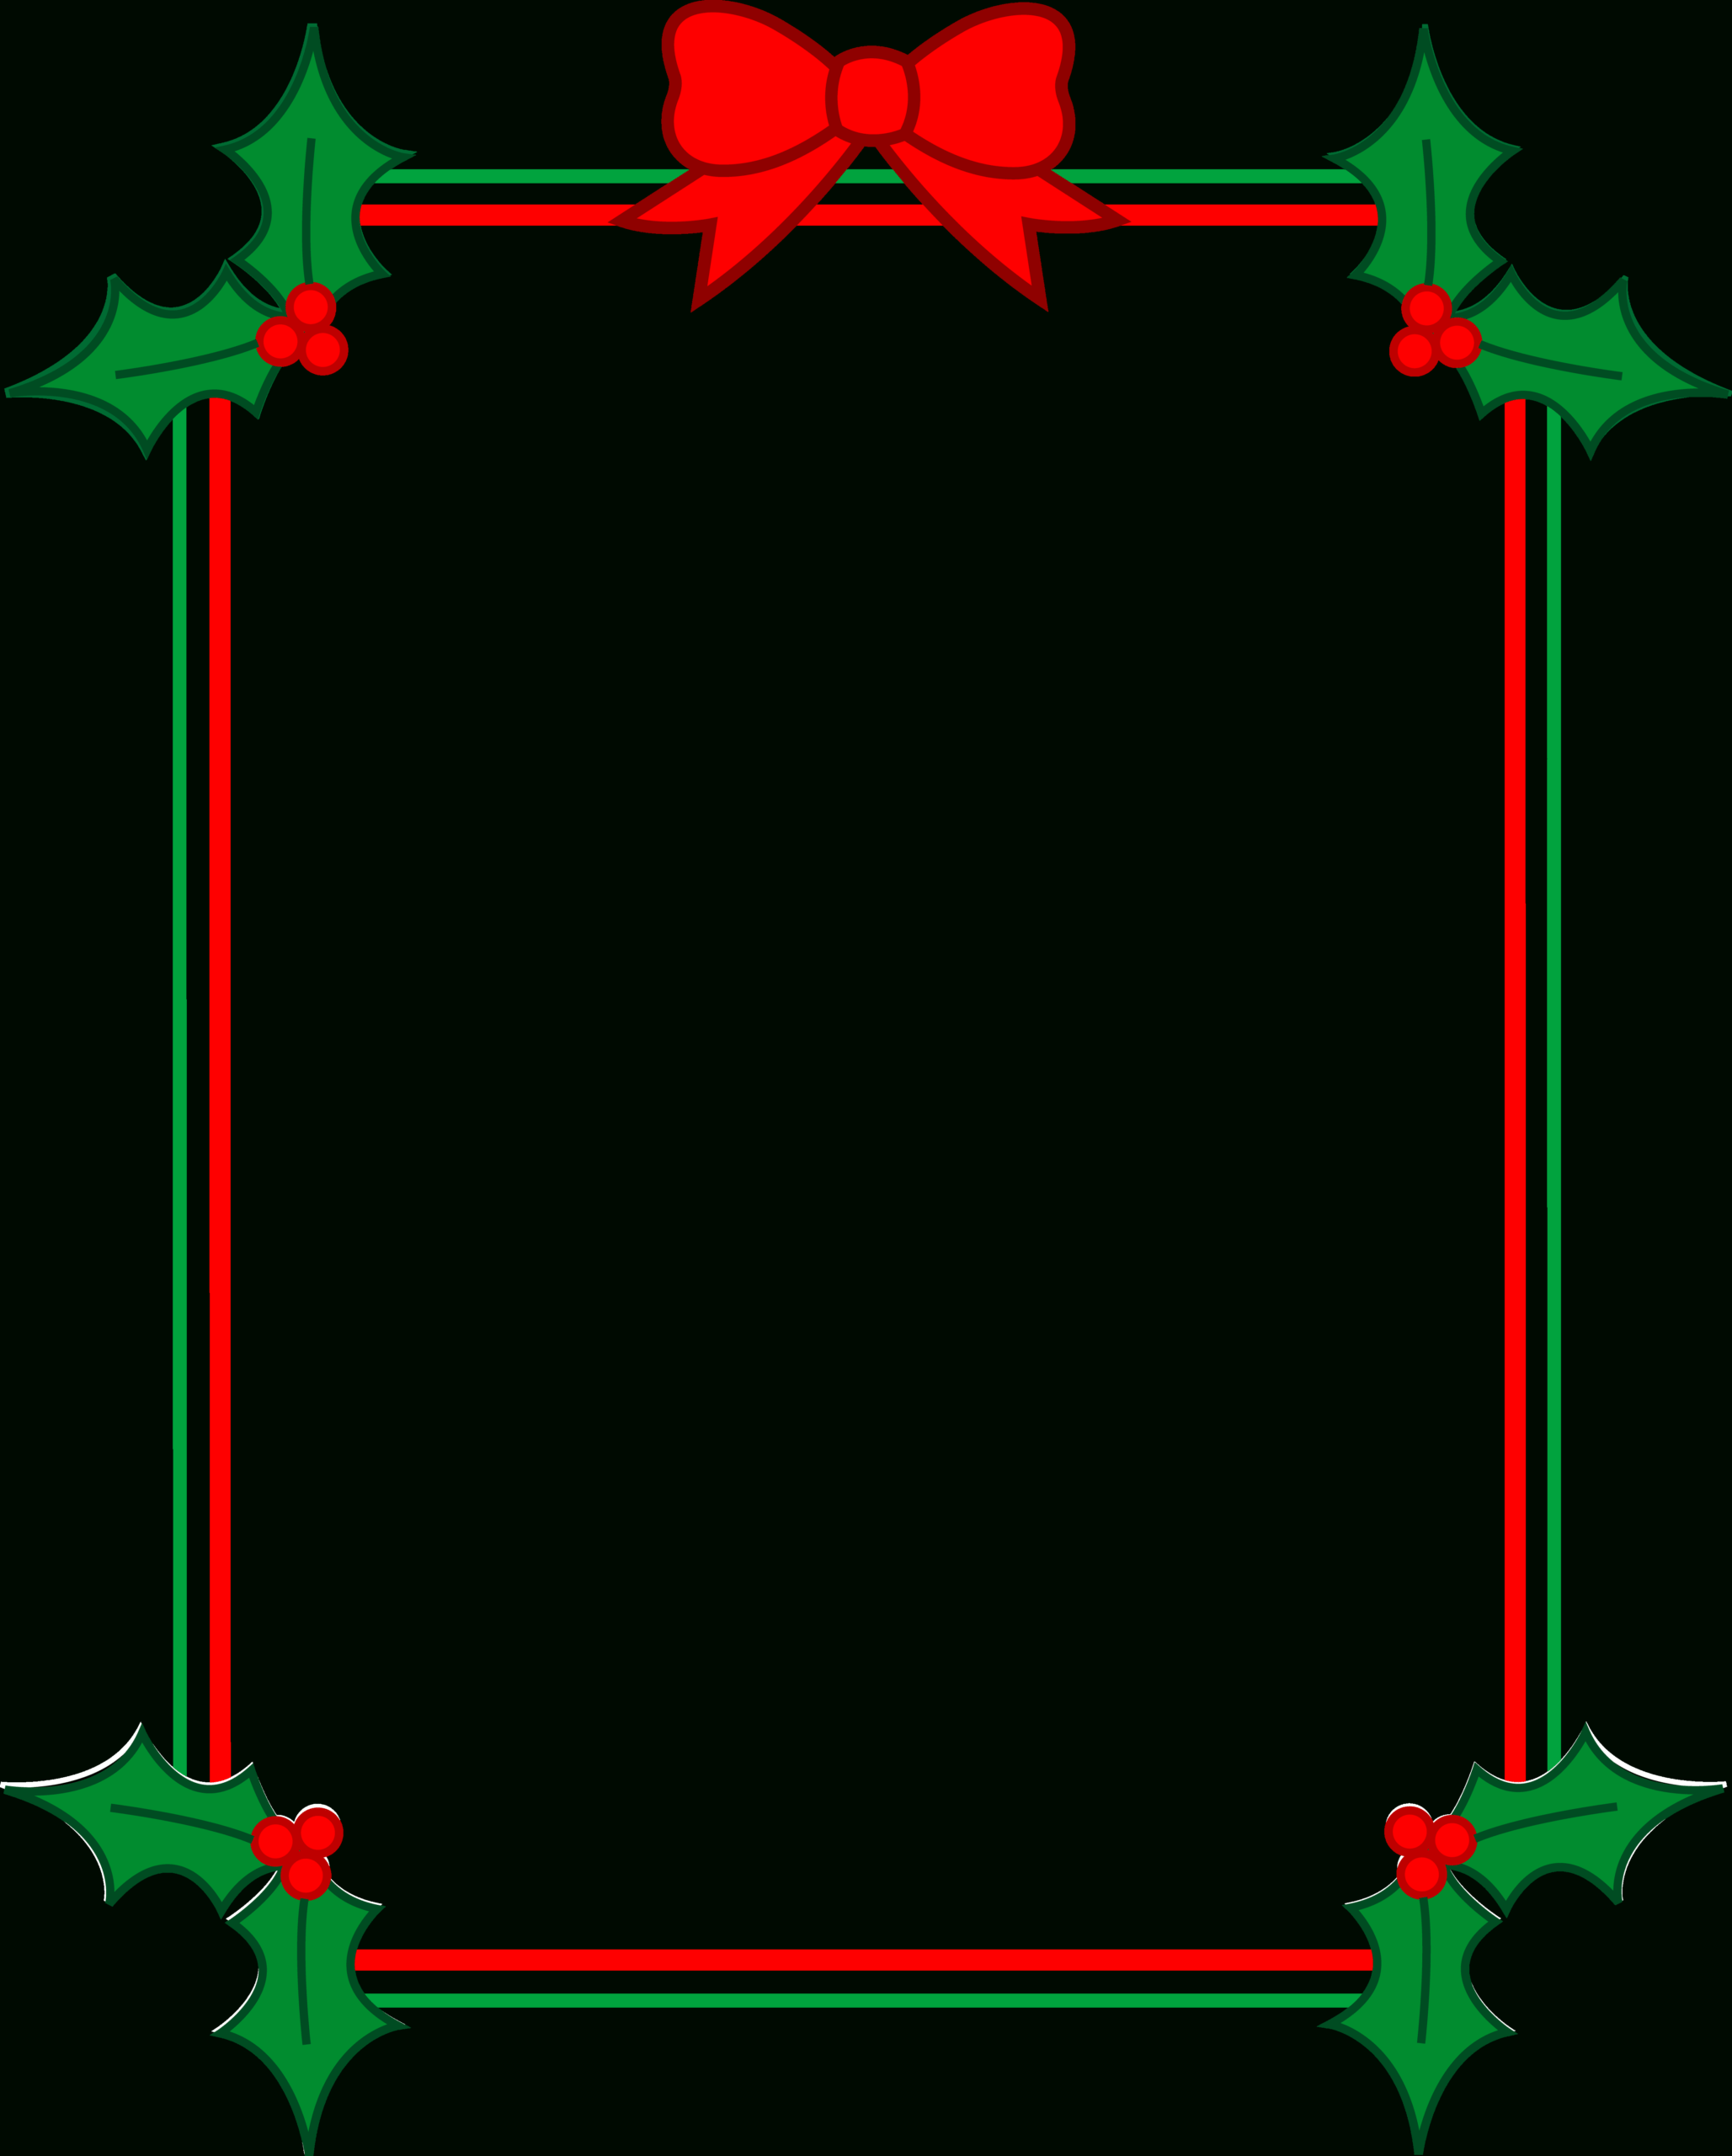 Christmas Clip Art Borders For Word Documents | Clipart With Christmas Border Word Template